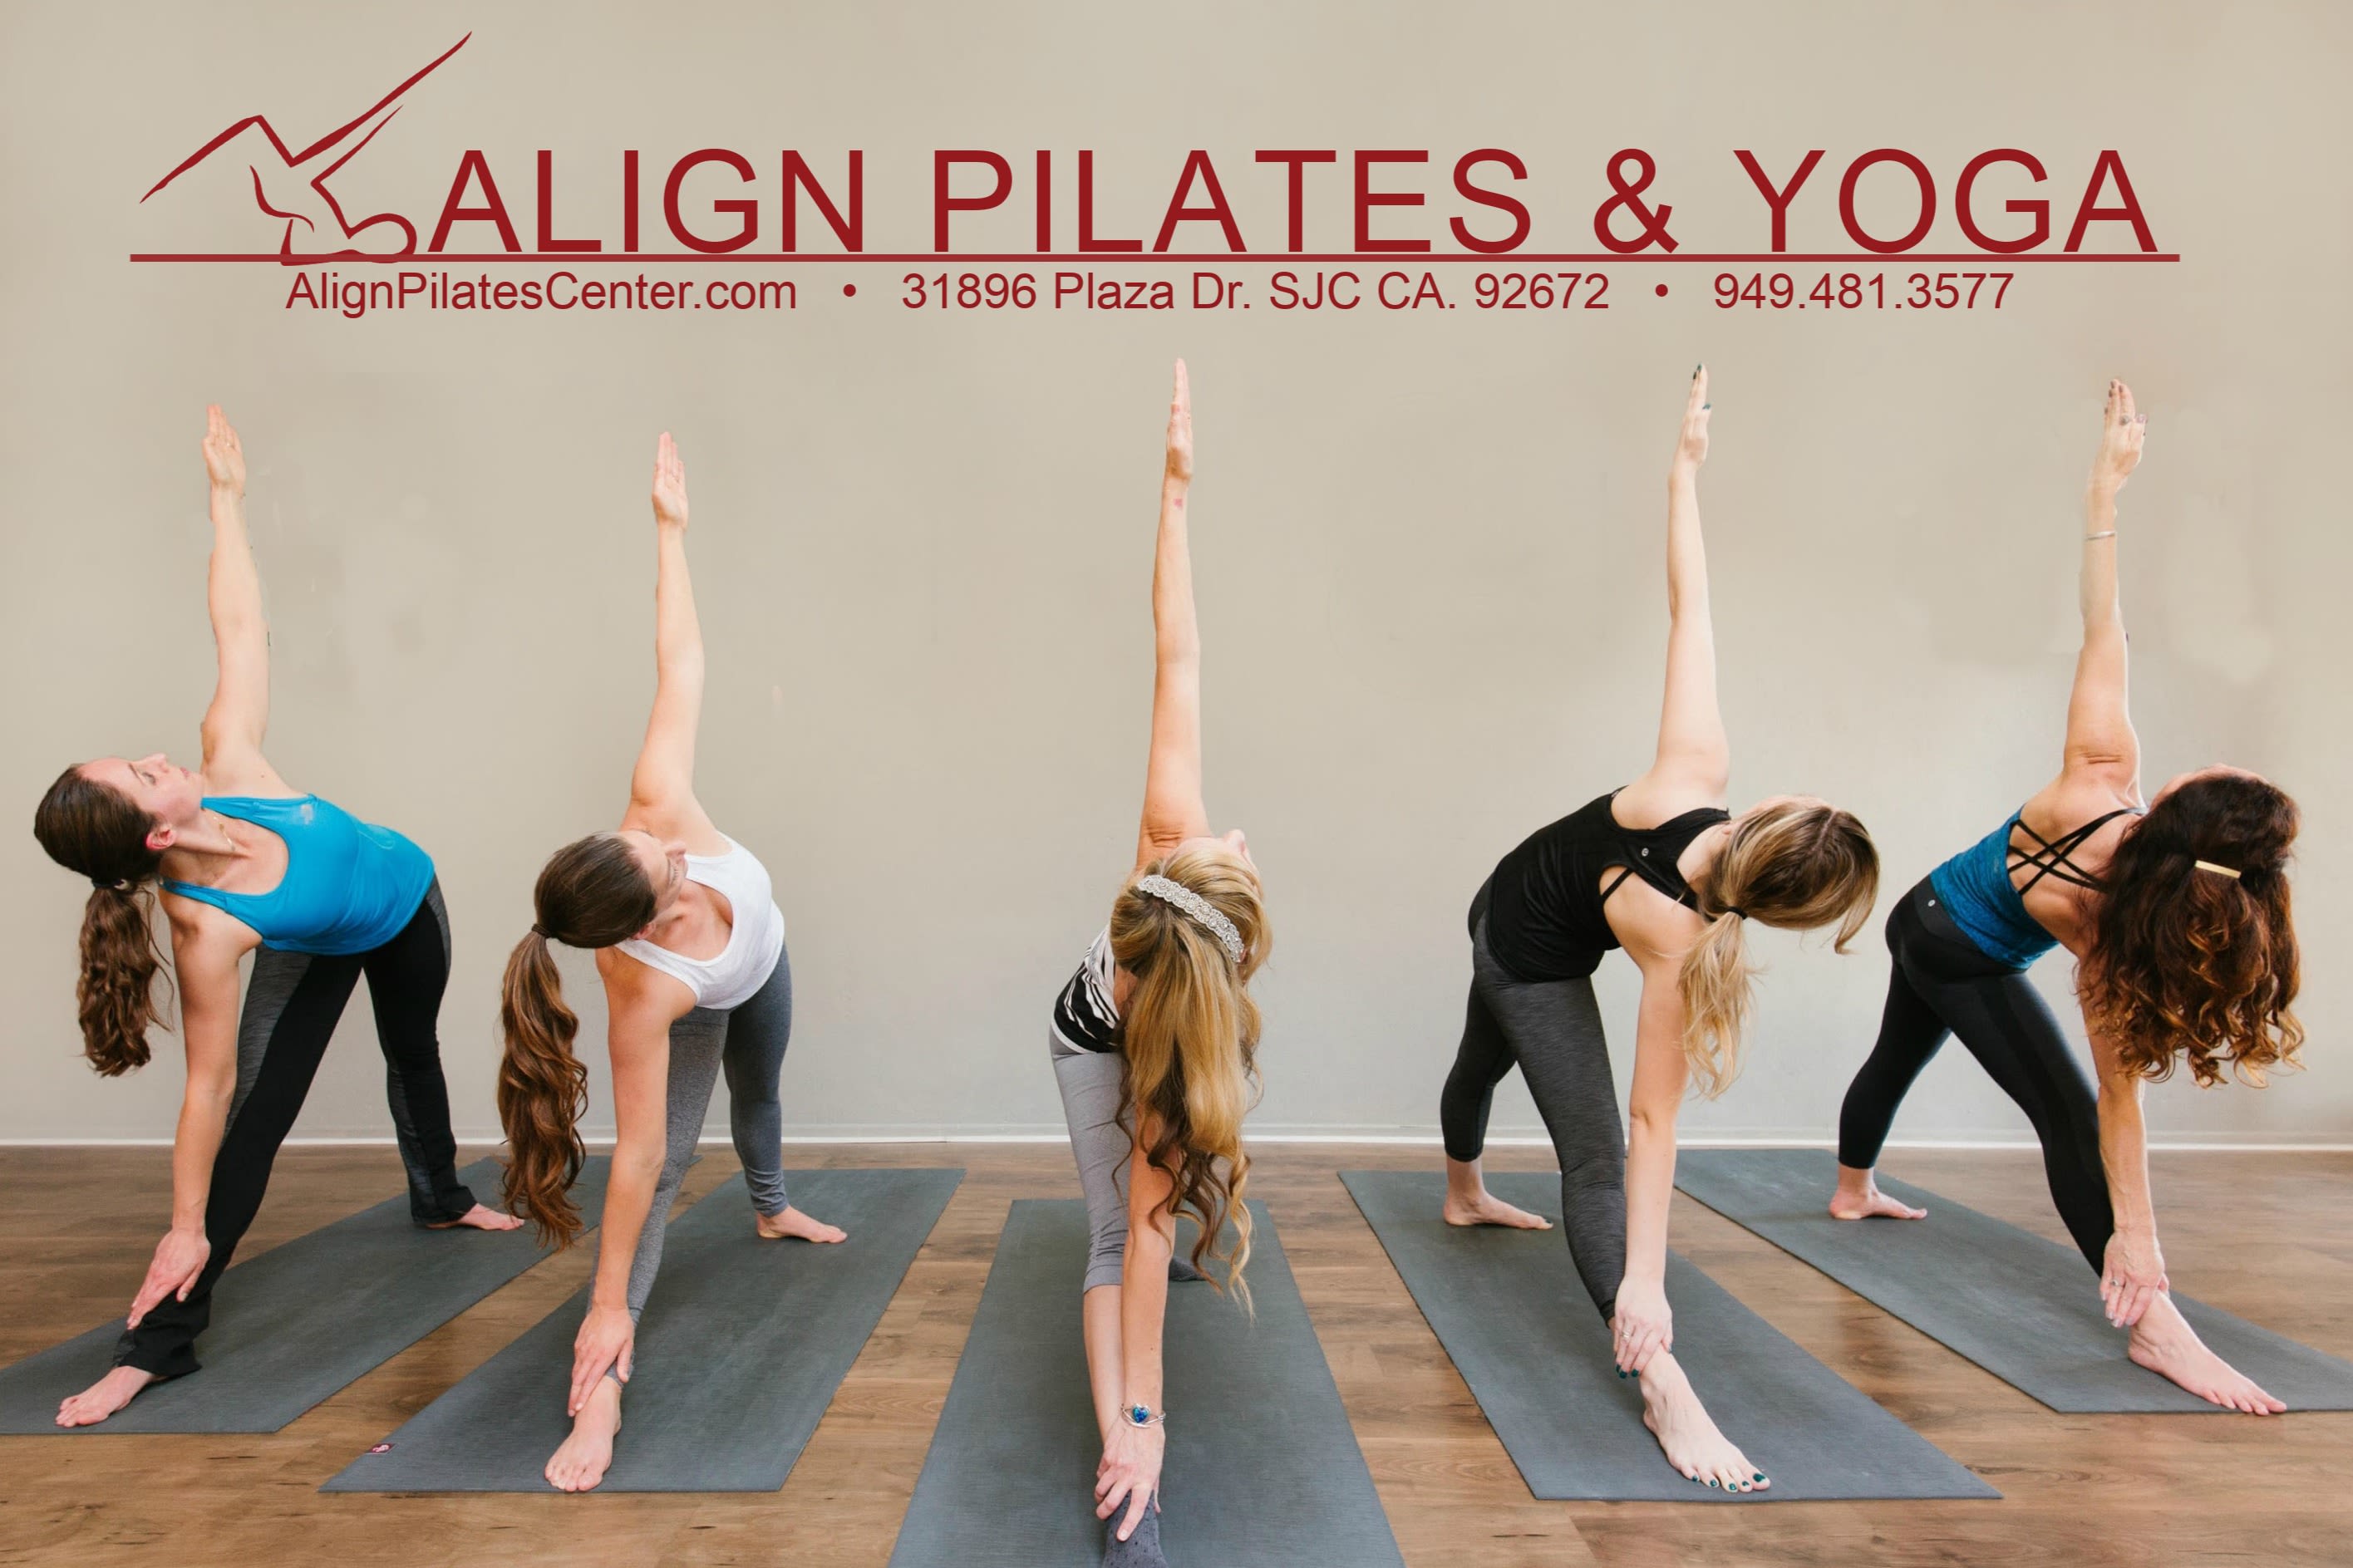 Align Pilates and Yoga Center: Read Reviews and Book Classes on ClassPass